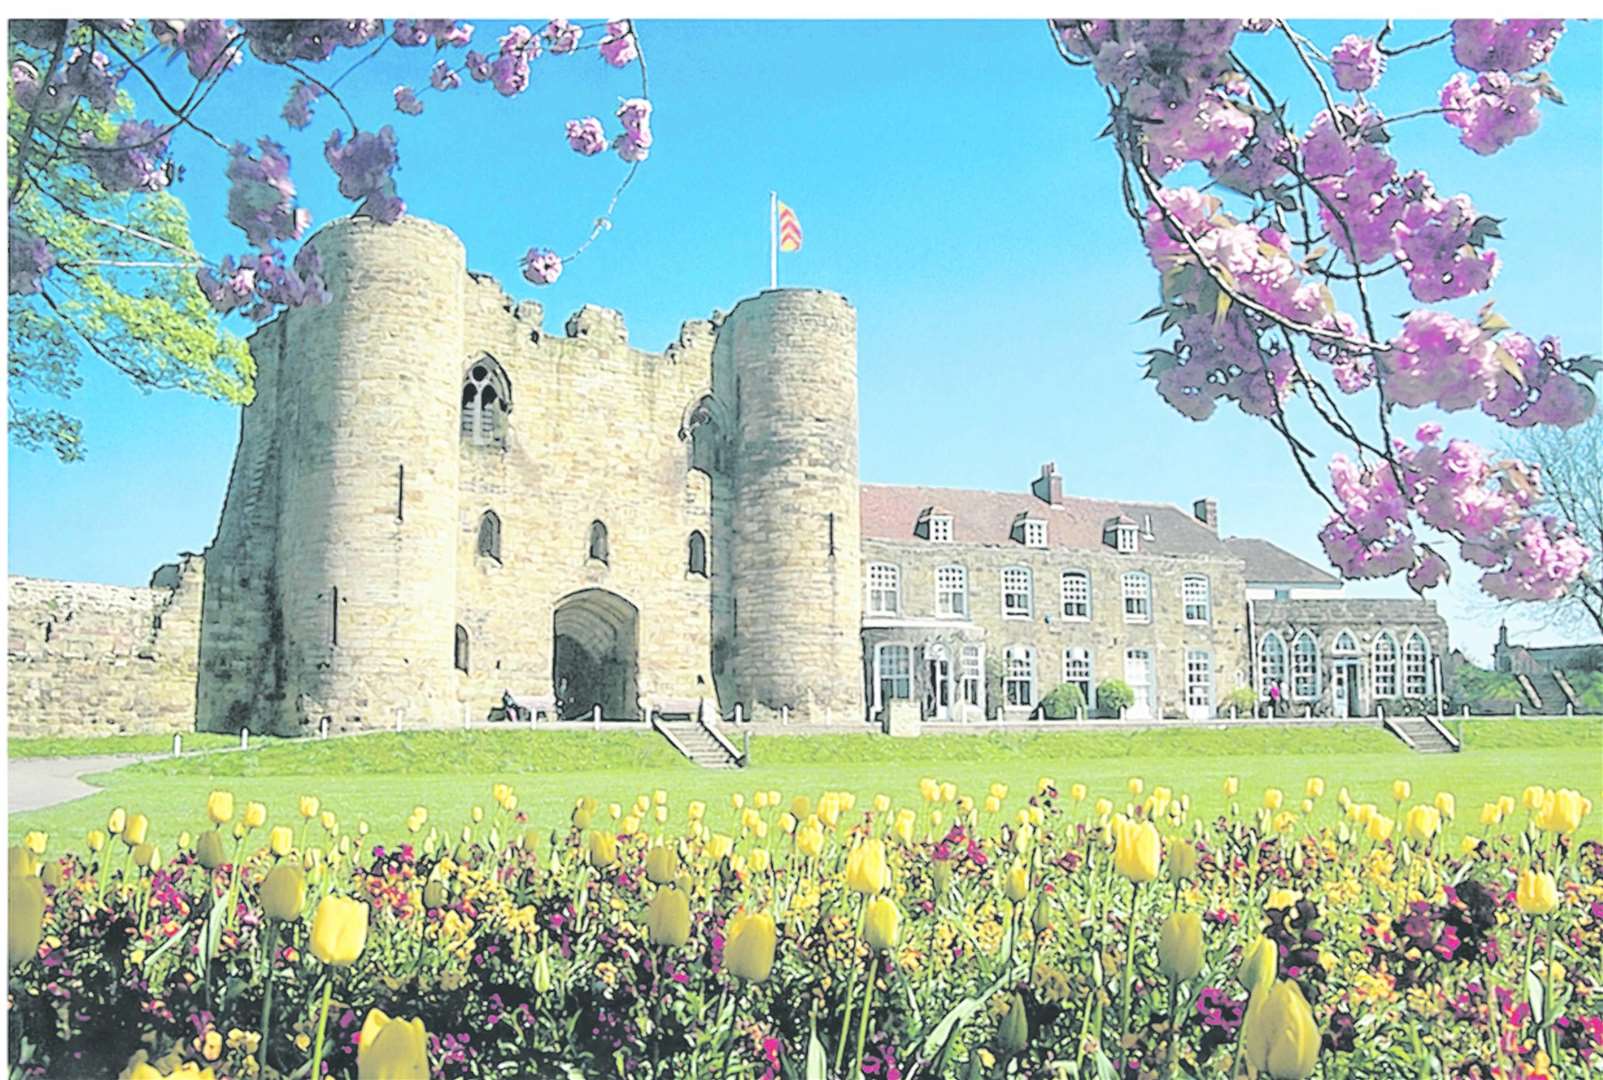 Tonbridge Castle Bailey Lawn is the venue for some free music this summer